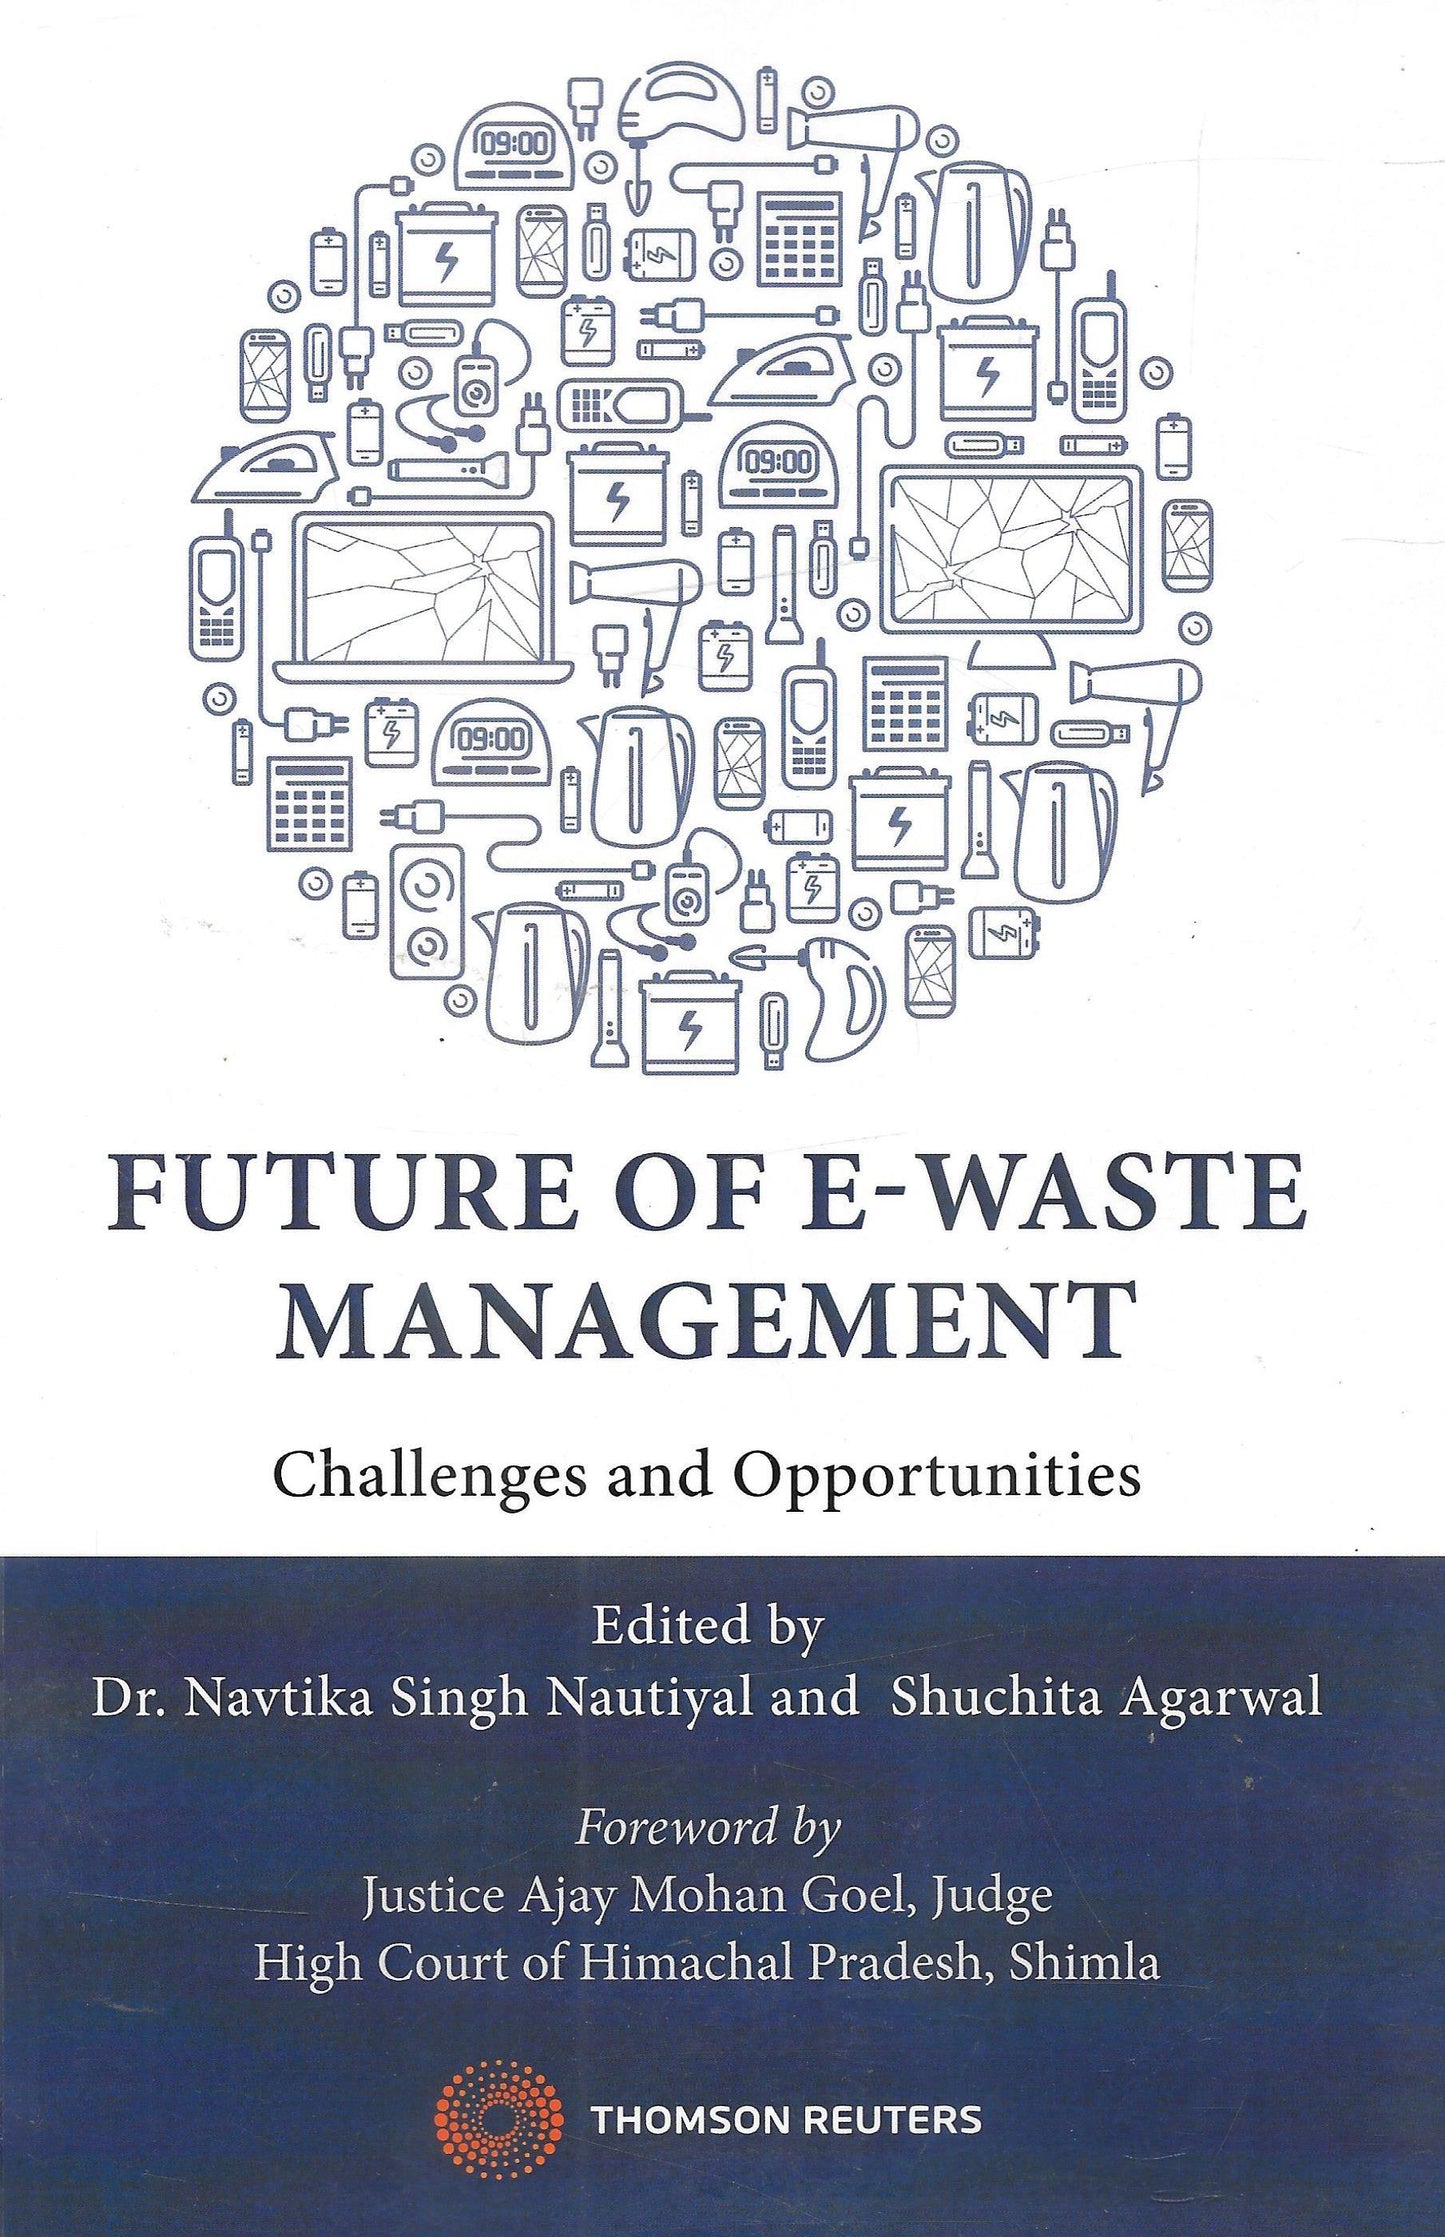 Future of E-Waste Management - Challenges and Opportunities